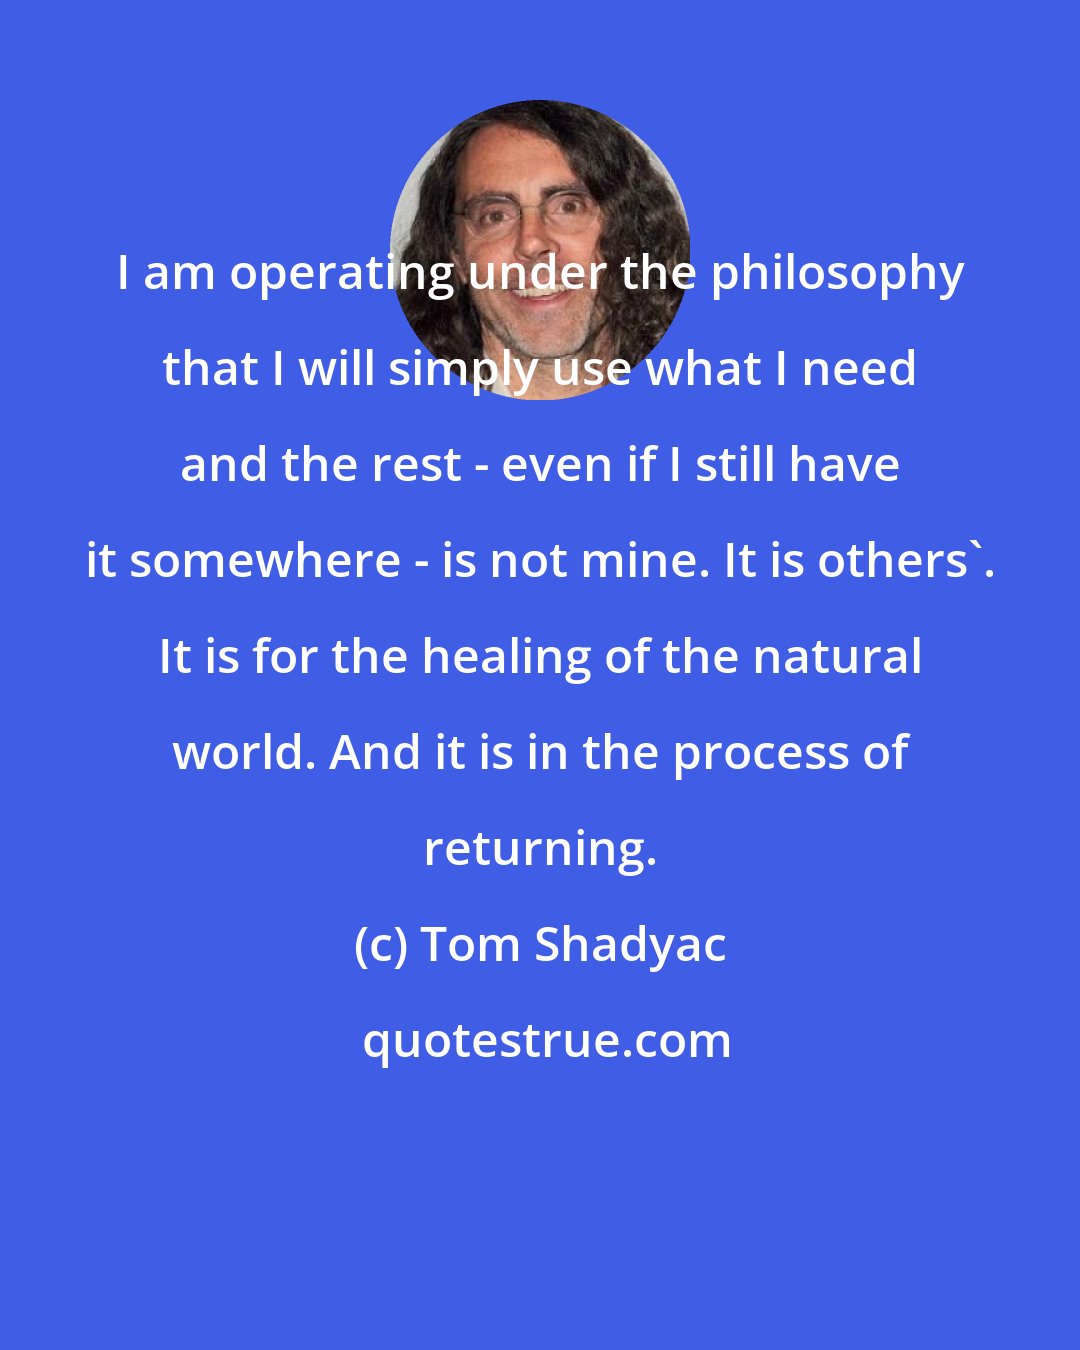 Tom Shadyac: I am operating under the philosophy that I will simply use what I need and the rest - even if I still have it somewhere - is not mine. It is others'. It is for the healing of the natural world. And it is in the process of returning.